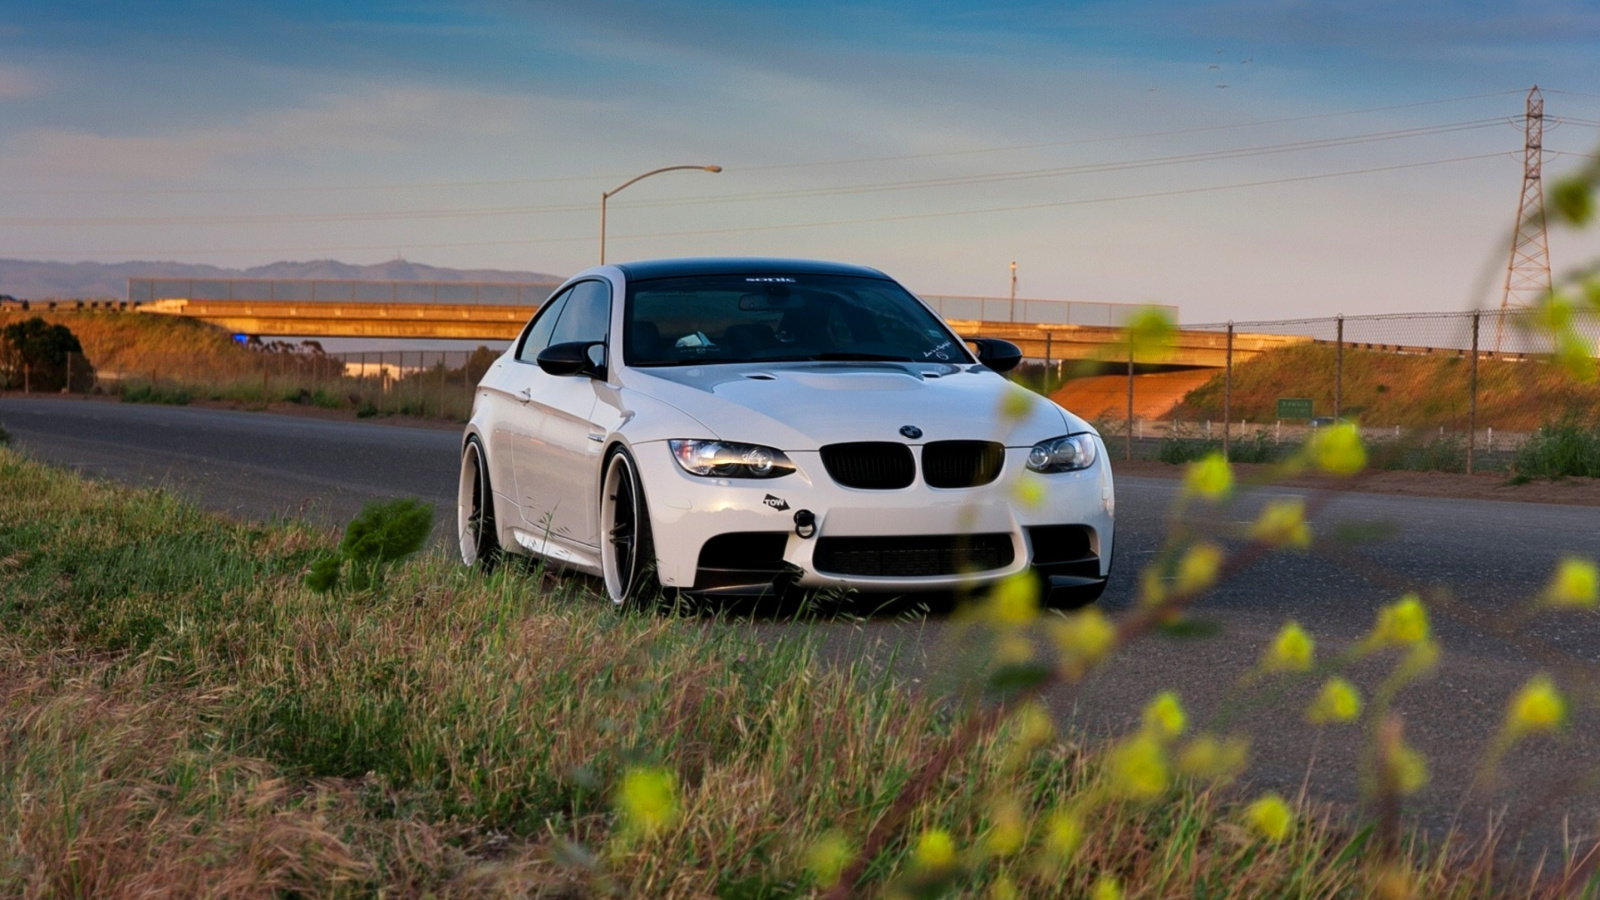 BMW M3 with Wheels 19 wallpaper 1600x900